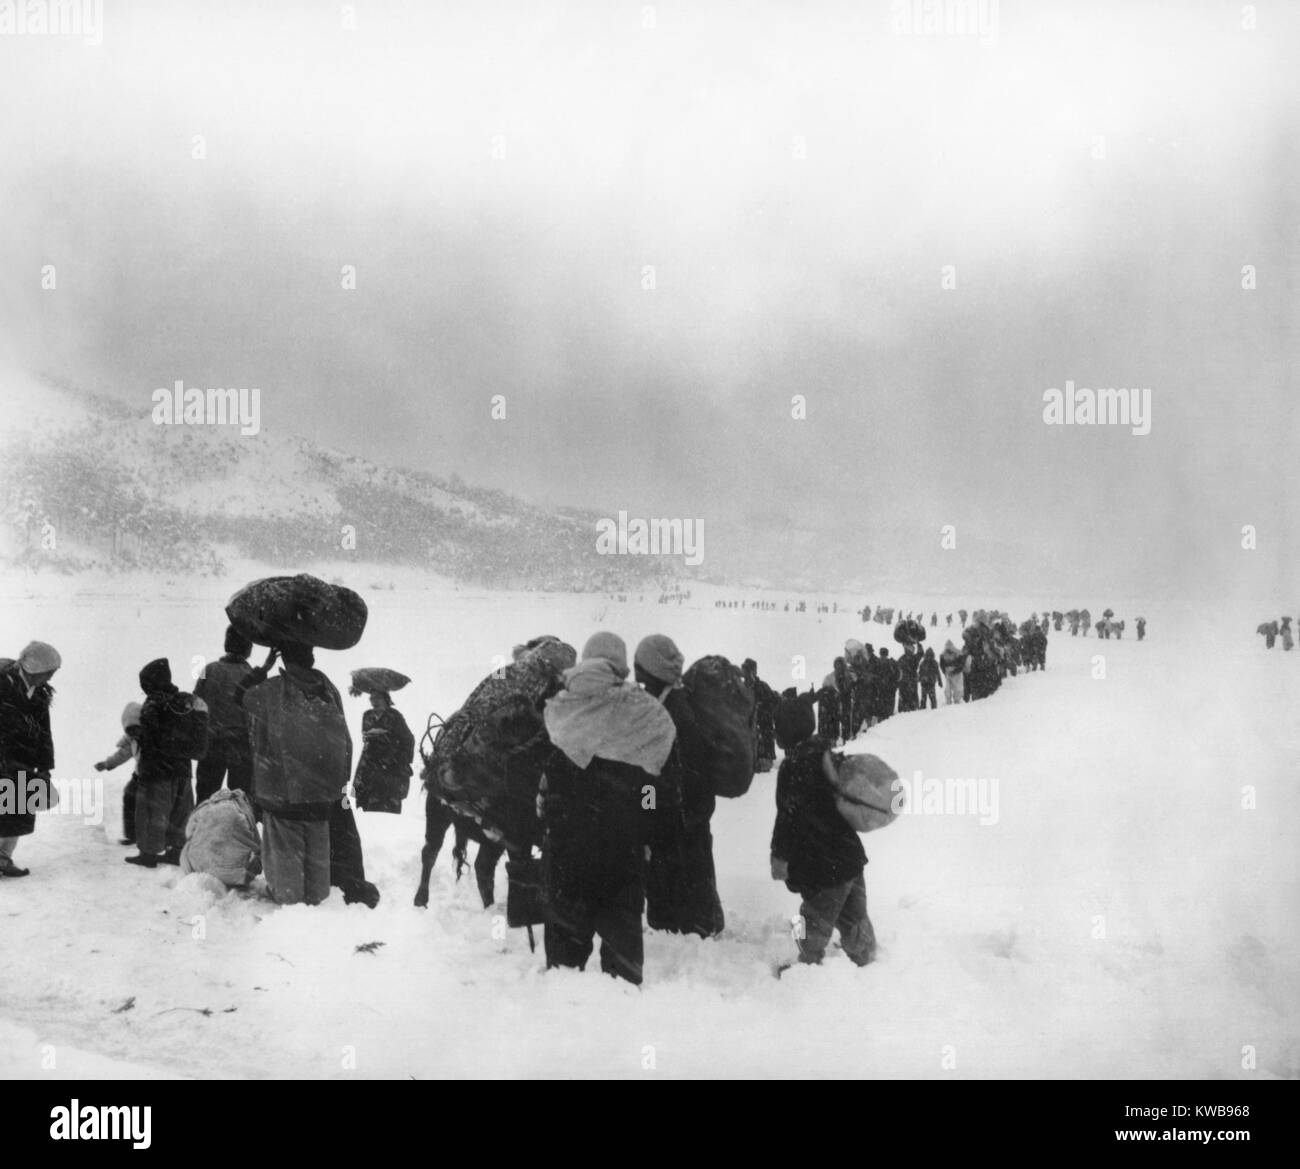 Korean refugees slog through snow outside of Kangnung (Gangneung), moving south with bundles of belongings. The South Korean Army was withdrawing south in the same area, with the North Korean/Chinese troops in pursuit. January 8, 1951. Korean War, 1950-53. (BSLOC_2014_11_245) Stock Photo